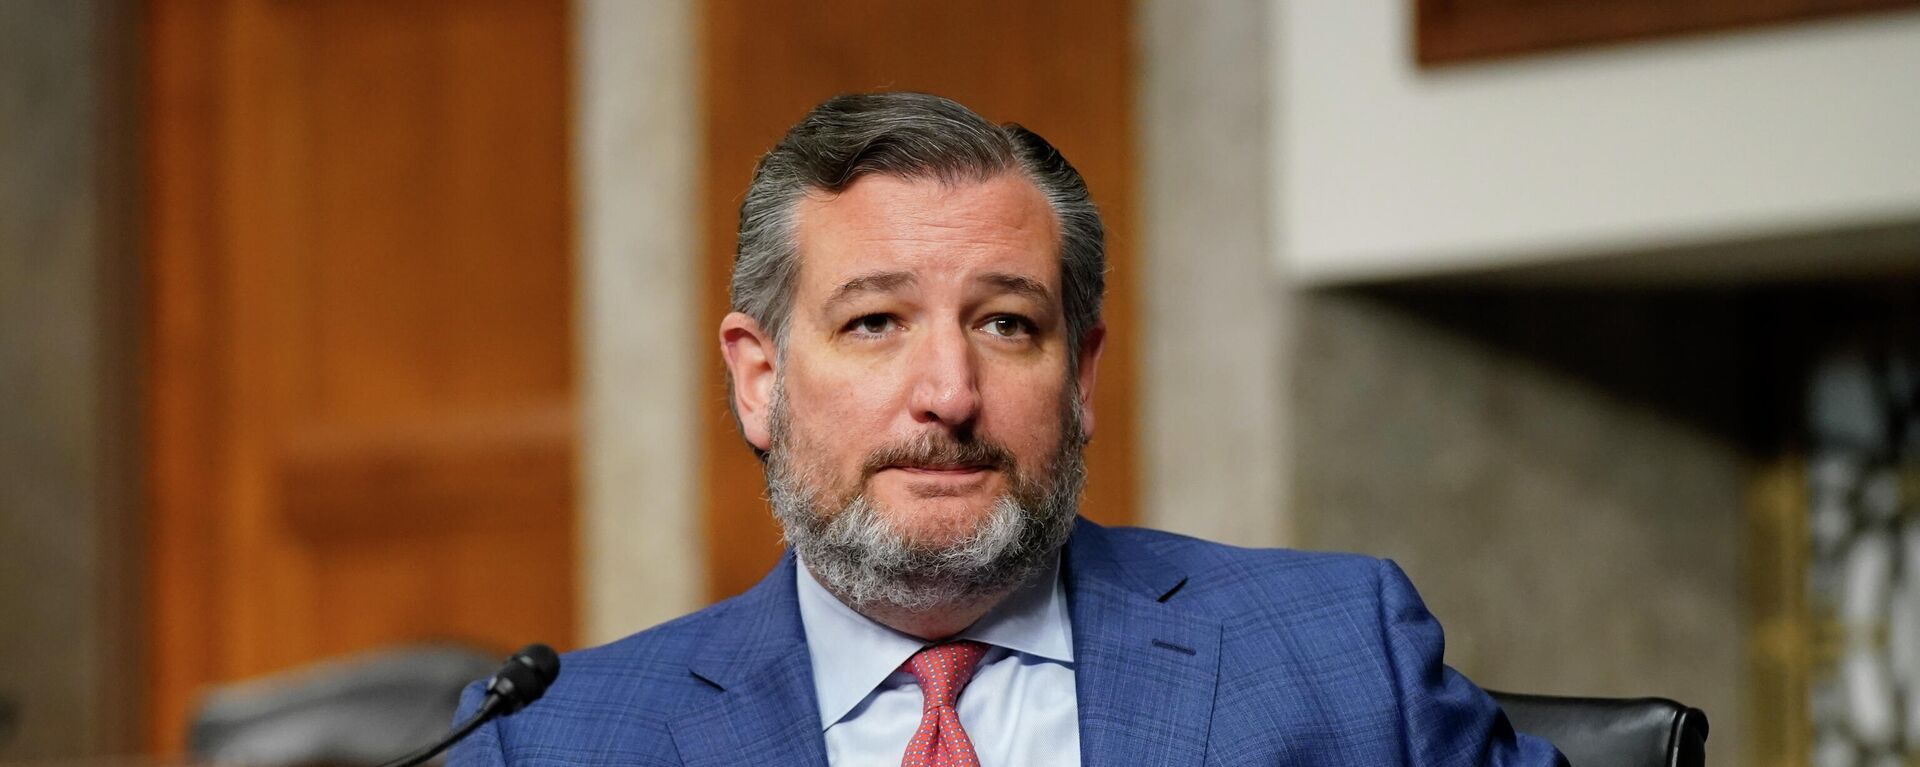 Sen. Ted Cruz, R-Texas, attends a hearing to examine the nomination of Nicholas Burns to U.S. Ambassador to China during a Senate Foreign Relations Committee on Capitol Hill in Washington, Wednesday, Oct. 20, 2021.  - Sputnik International, 1920, 23.02.2022